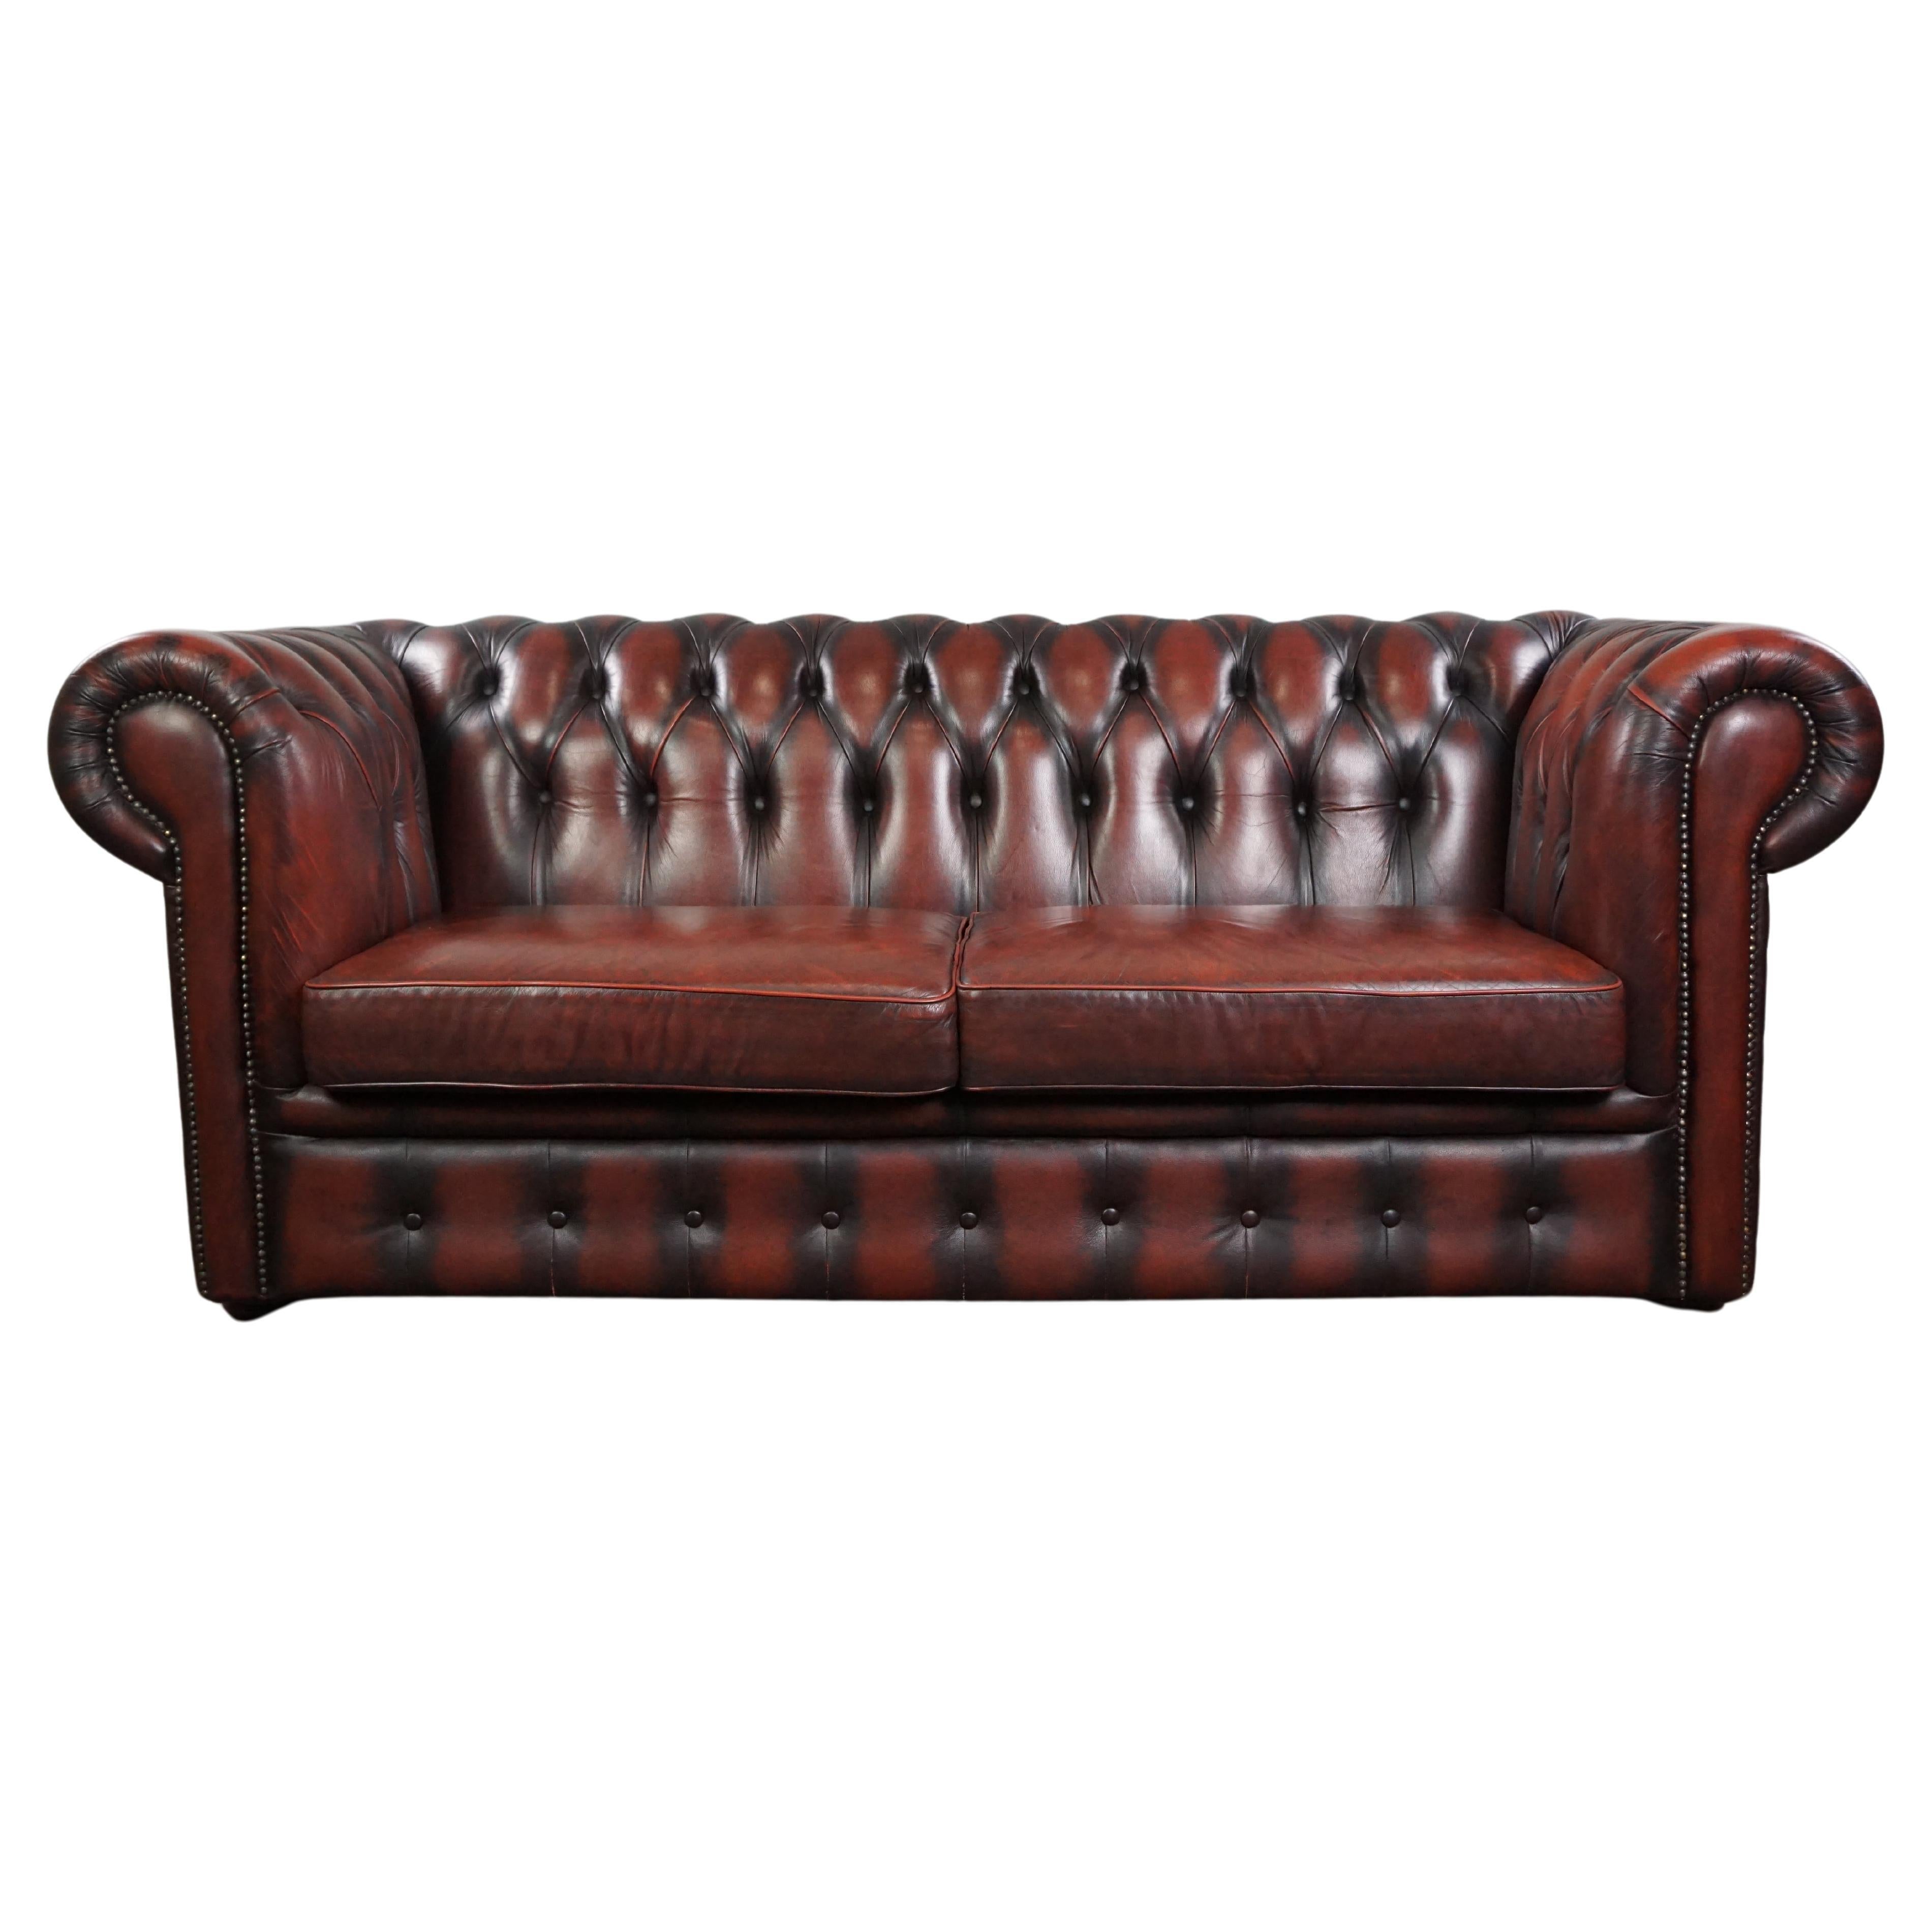 Insanely colored red cow leather Chesterfield sofa, spacious 2 seater